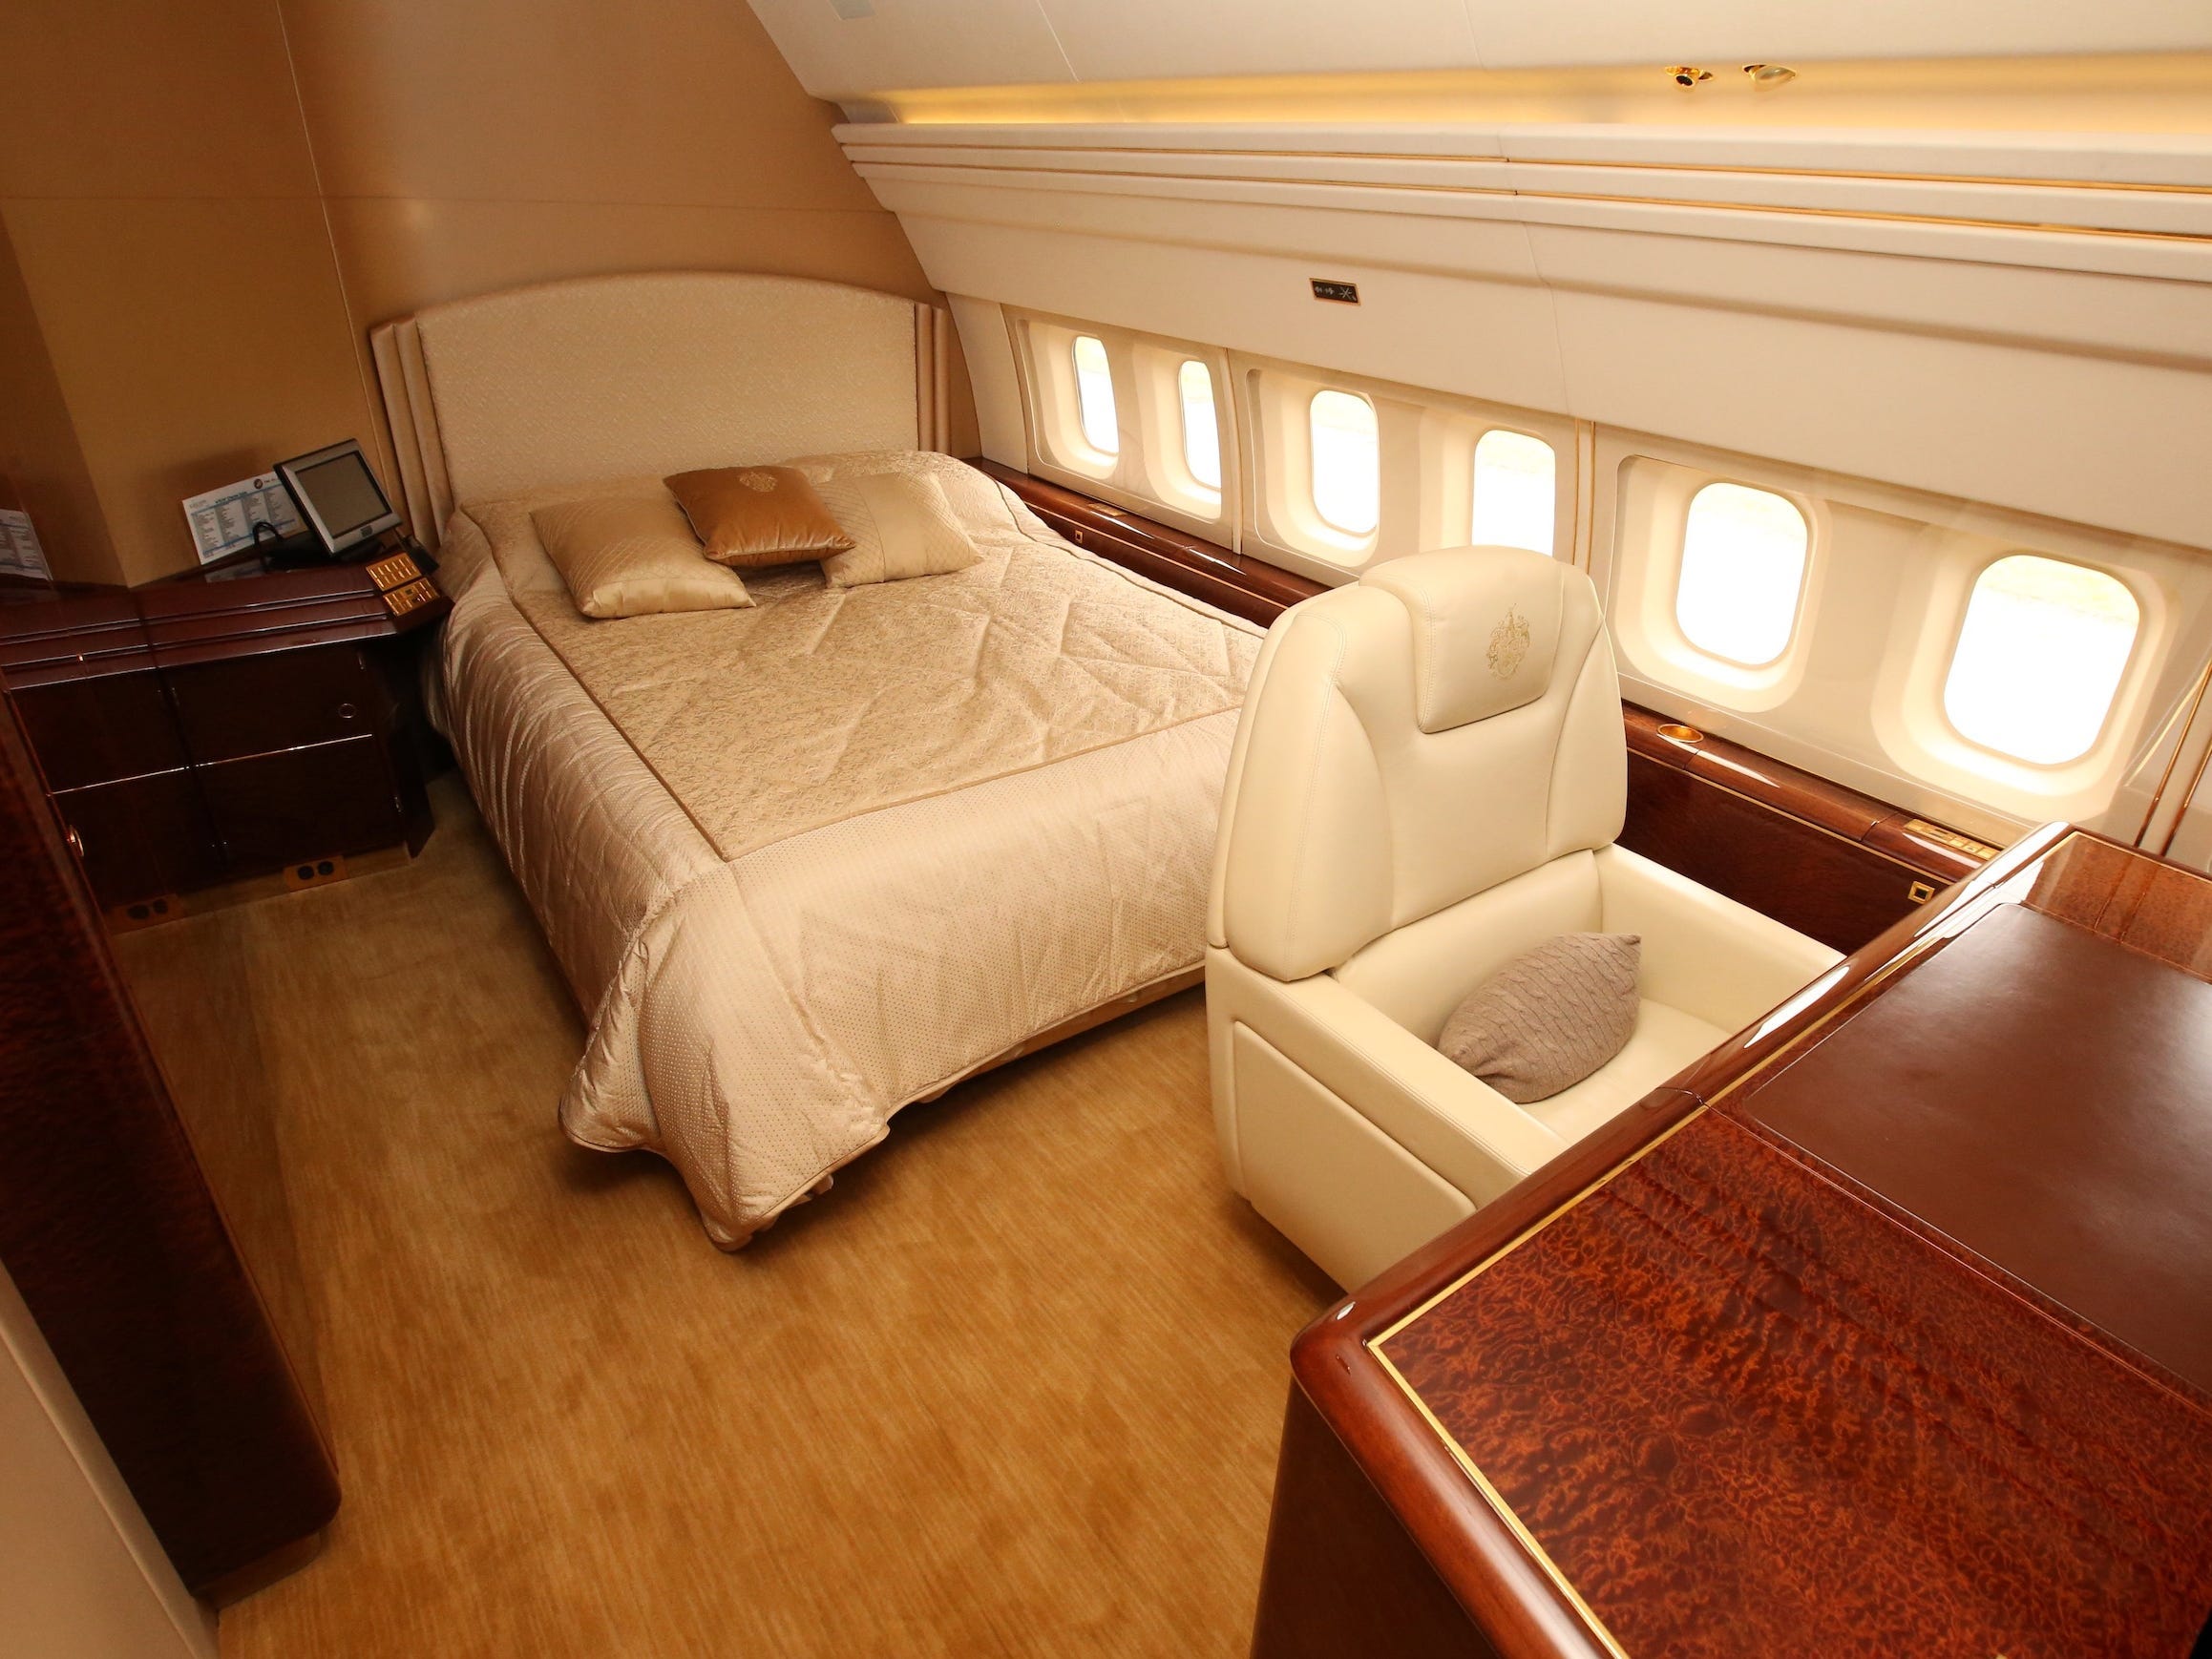 Trump's private bedroom on his 757.